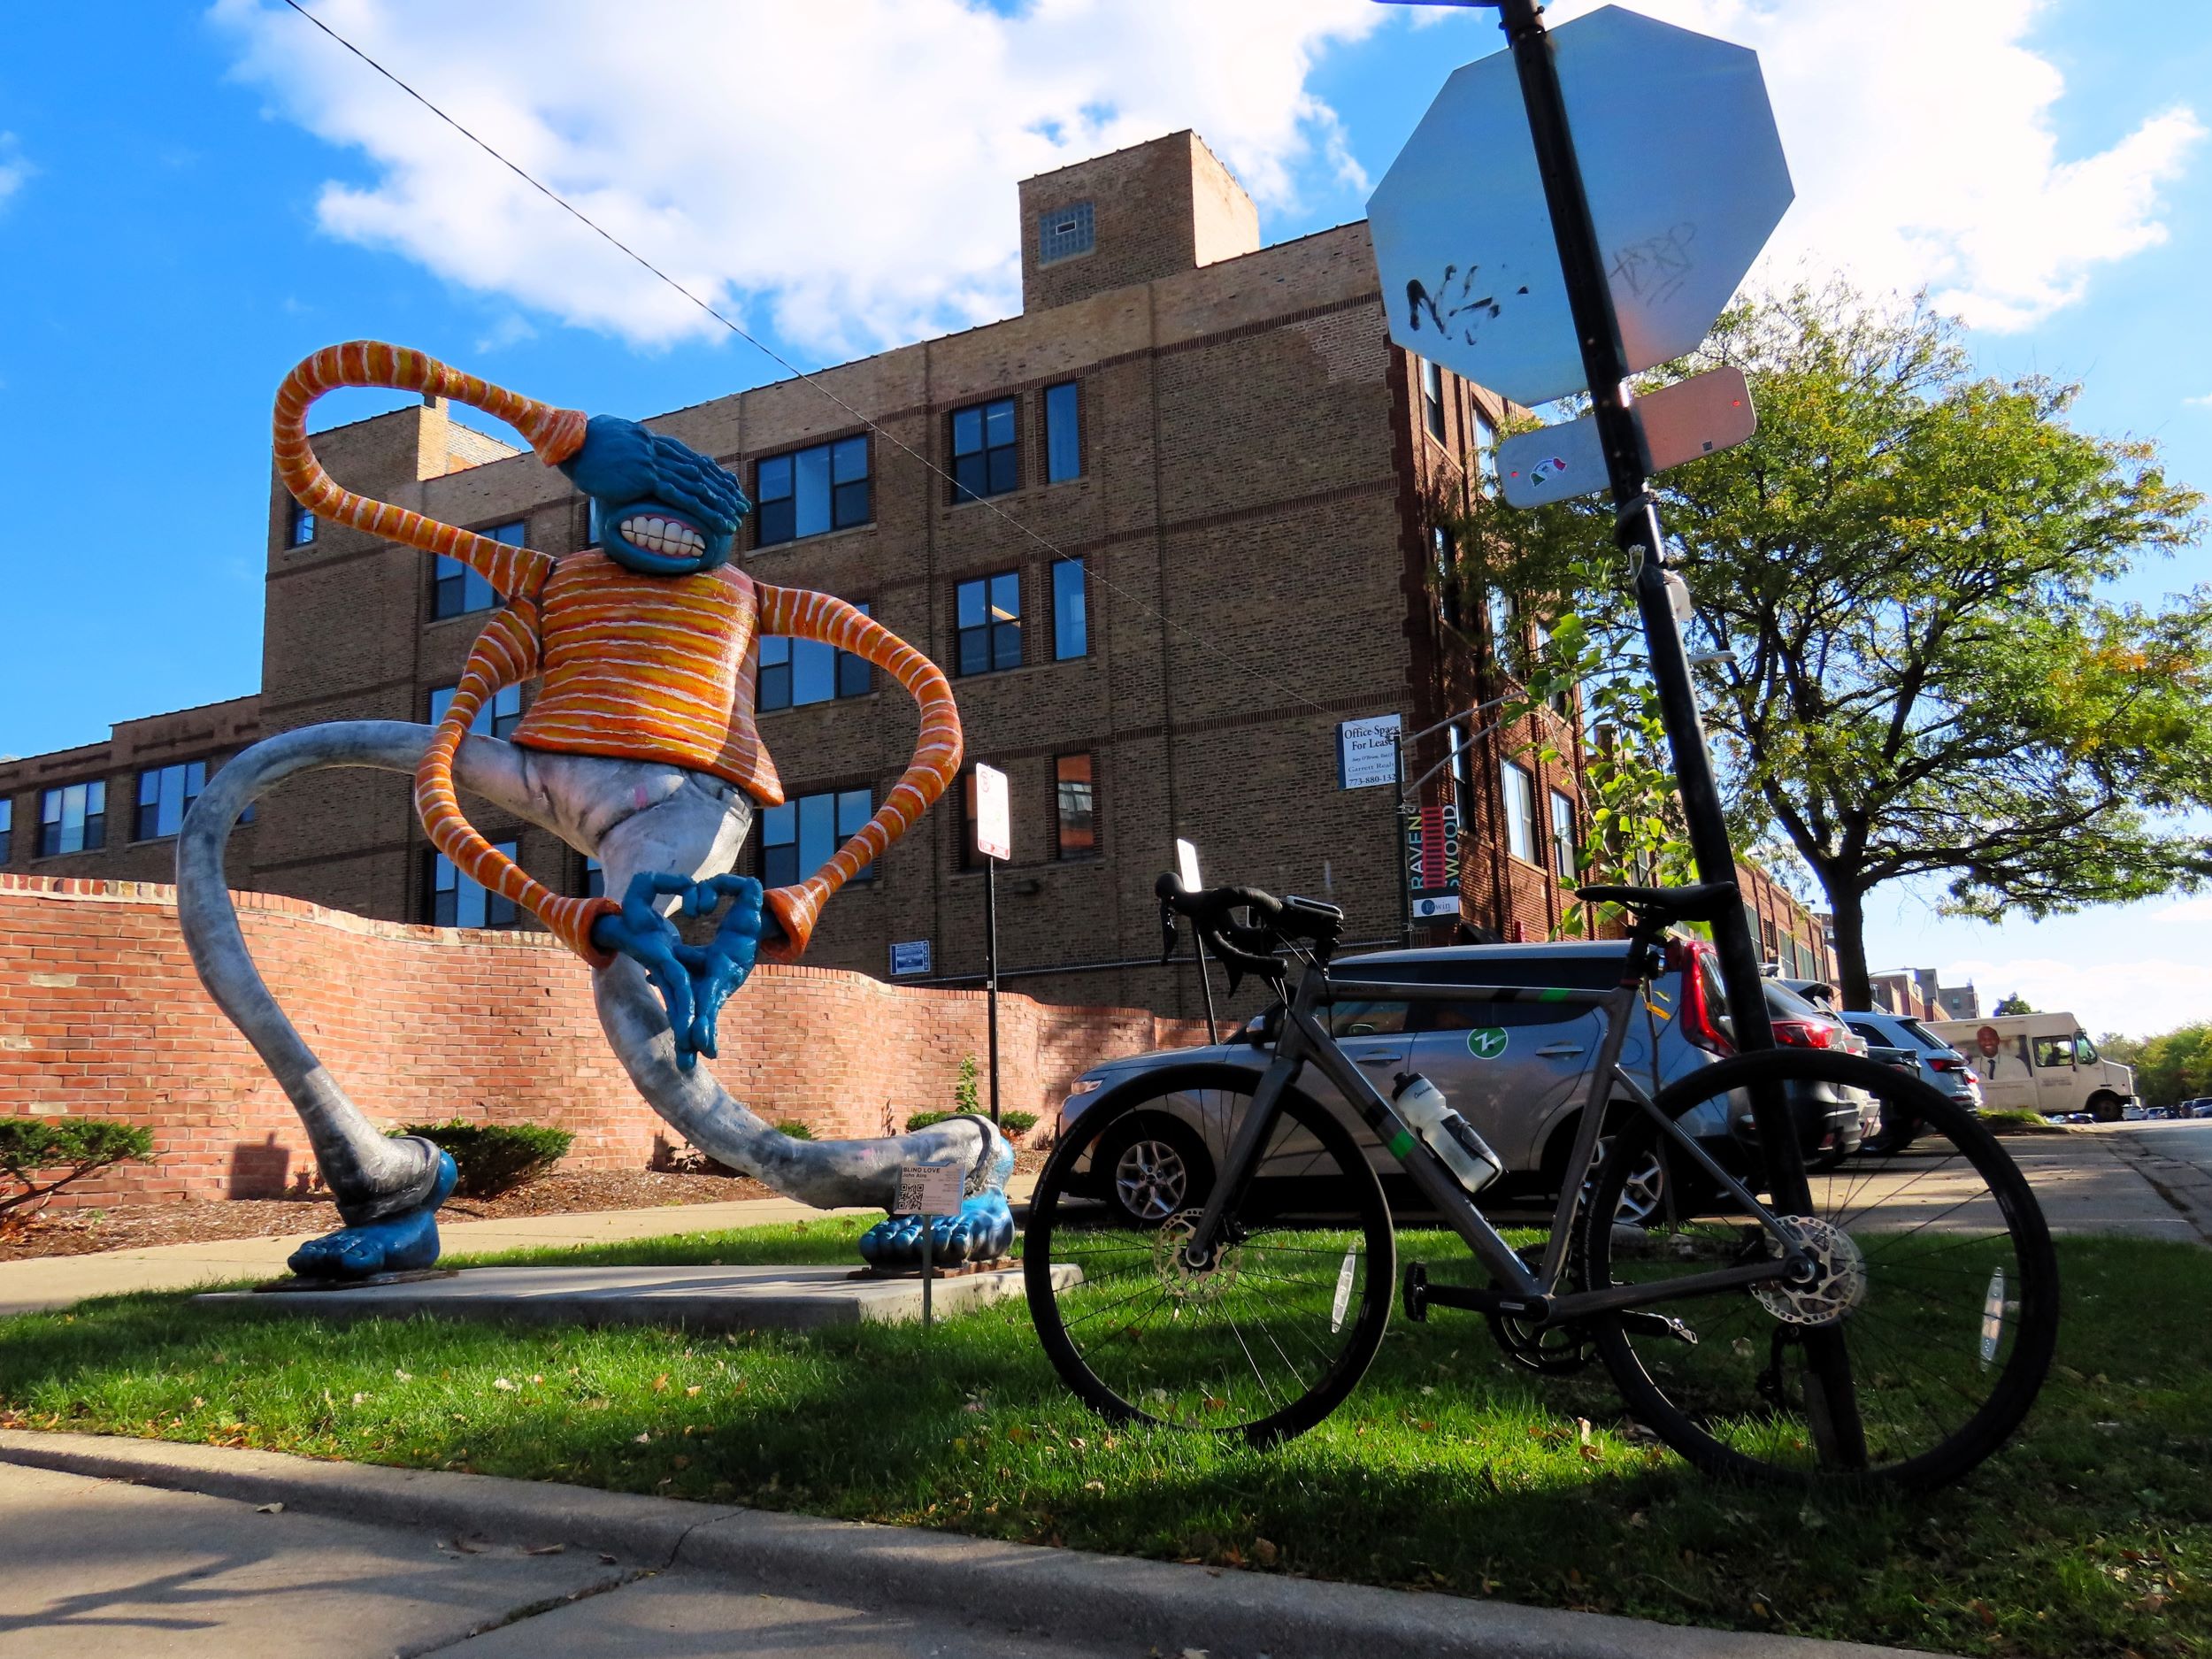 A tour bicycle standing to the side of a sculpture of a lanky blue man in a range sweater with three arms and one had covering his eyes.